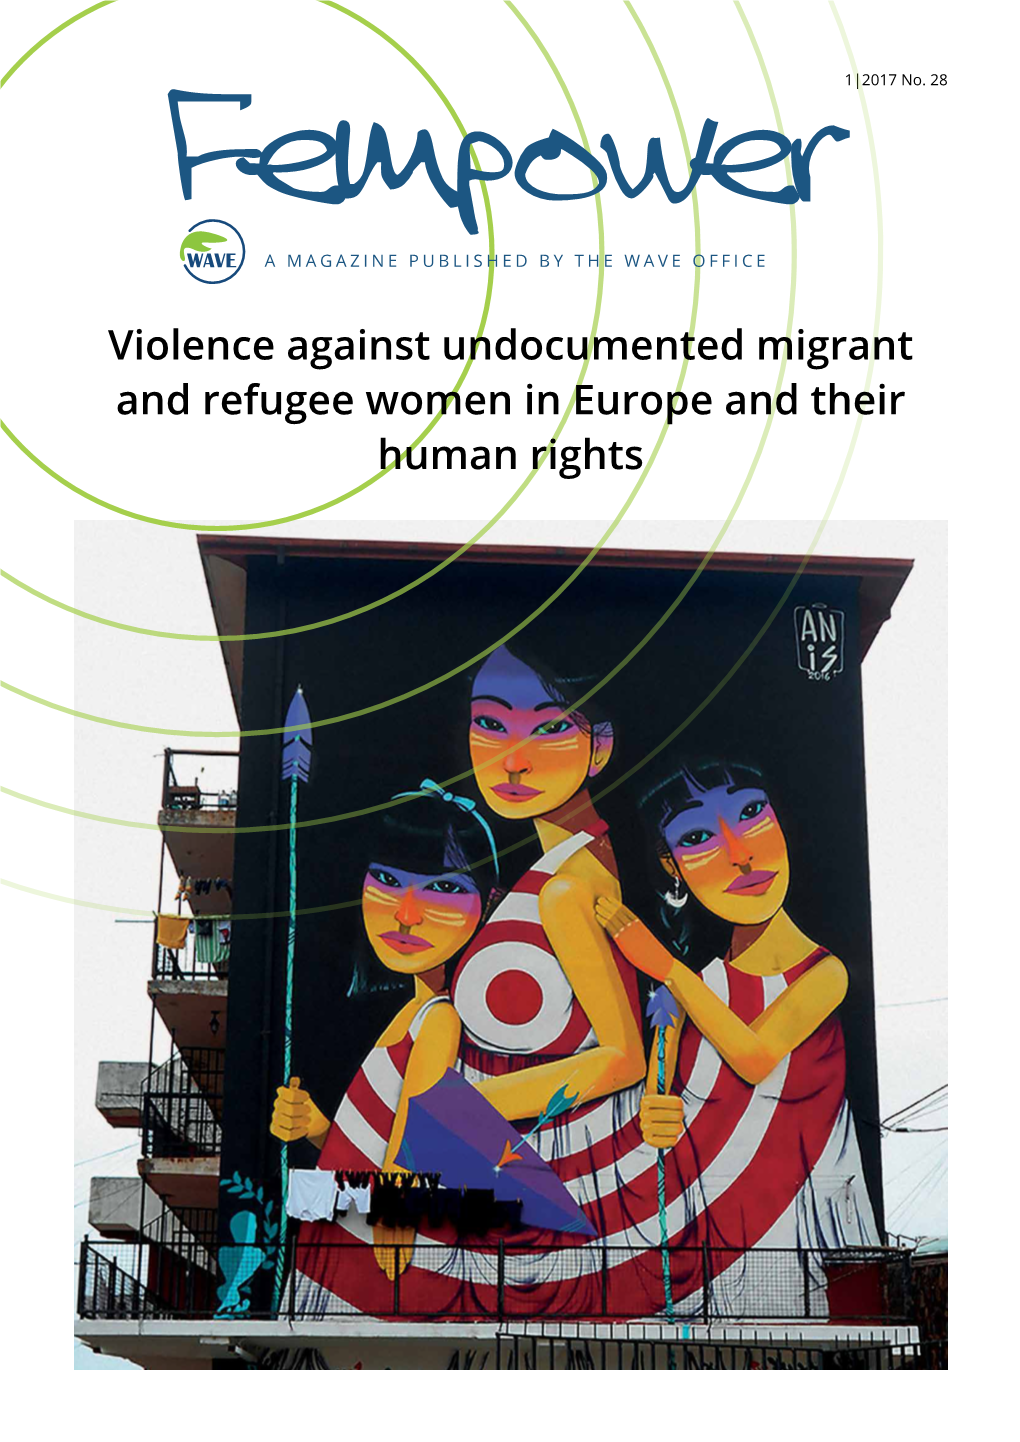 Violence Against Undocumented Migrant and Refugee Women in Europe and Their Human Rights